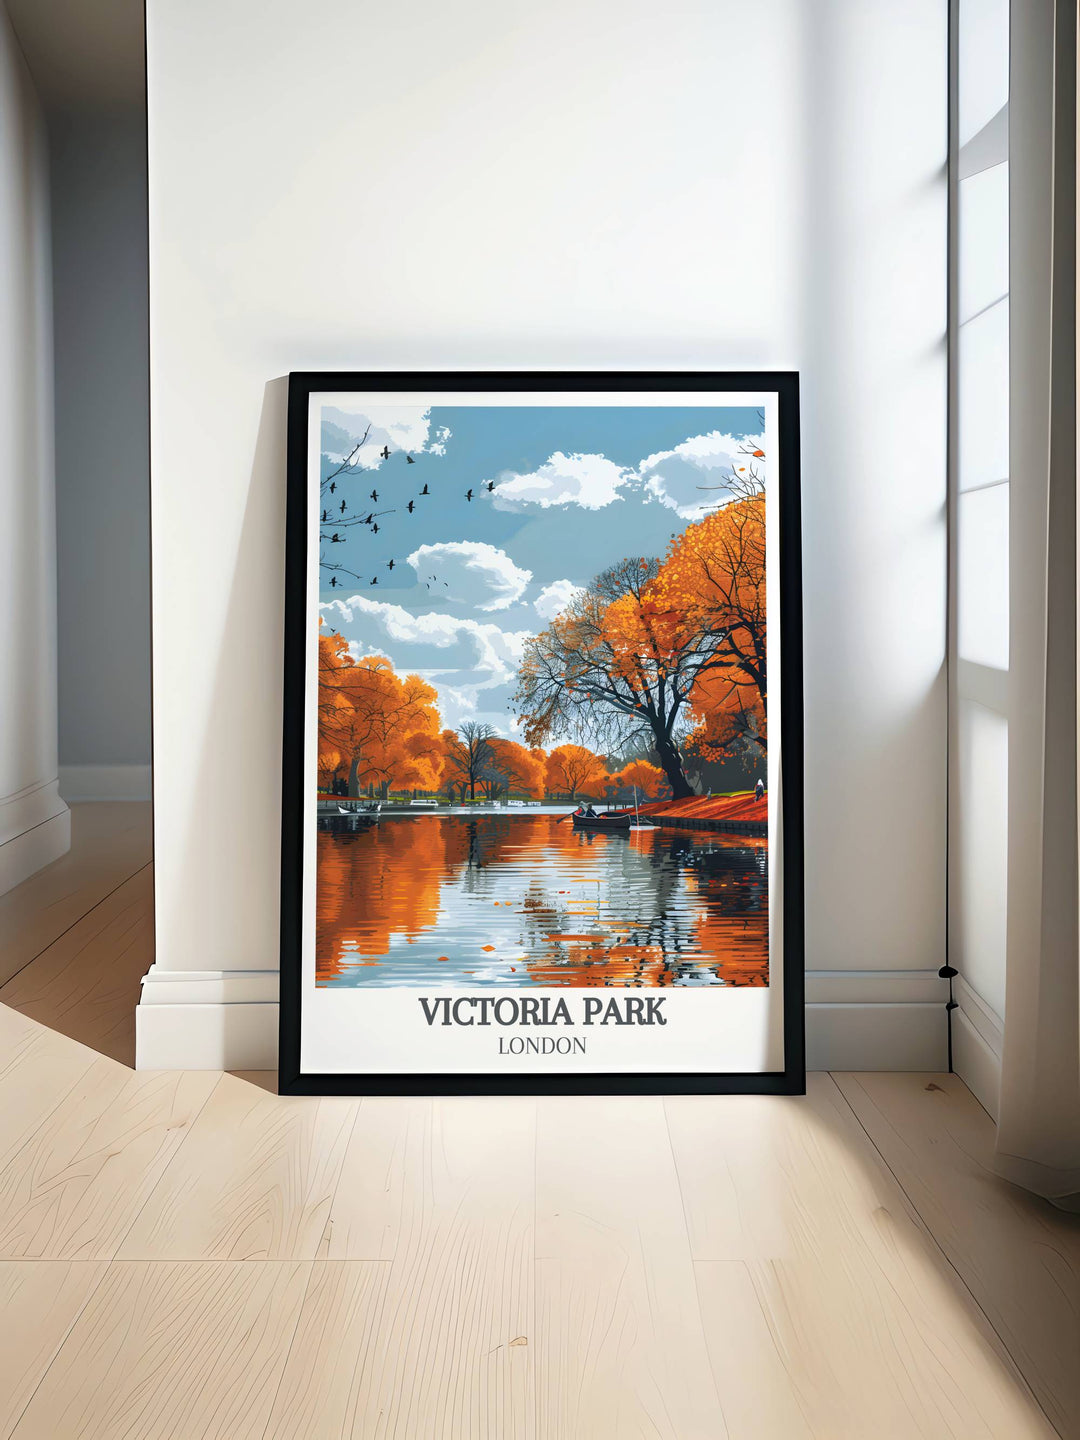 Victoria Park wall art showcasing the serene beauty of The Boating Lake in East London ideal for adding a touch of nature to your home decor.